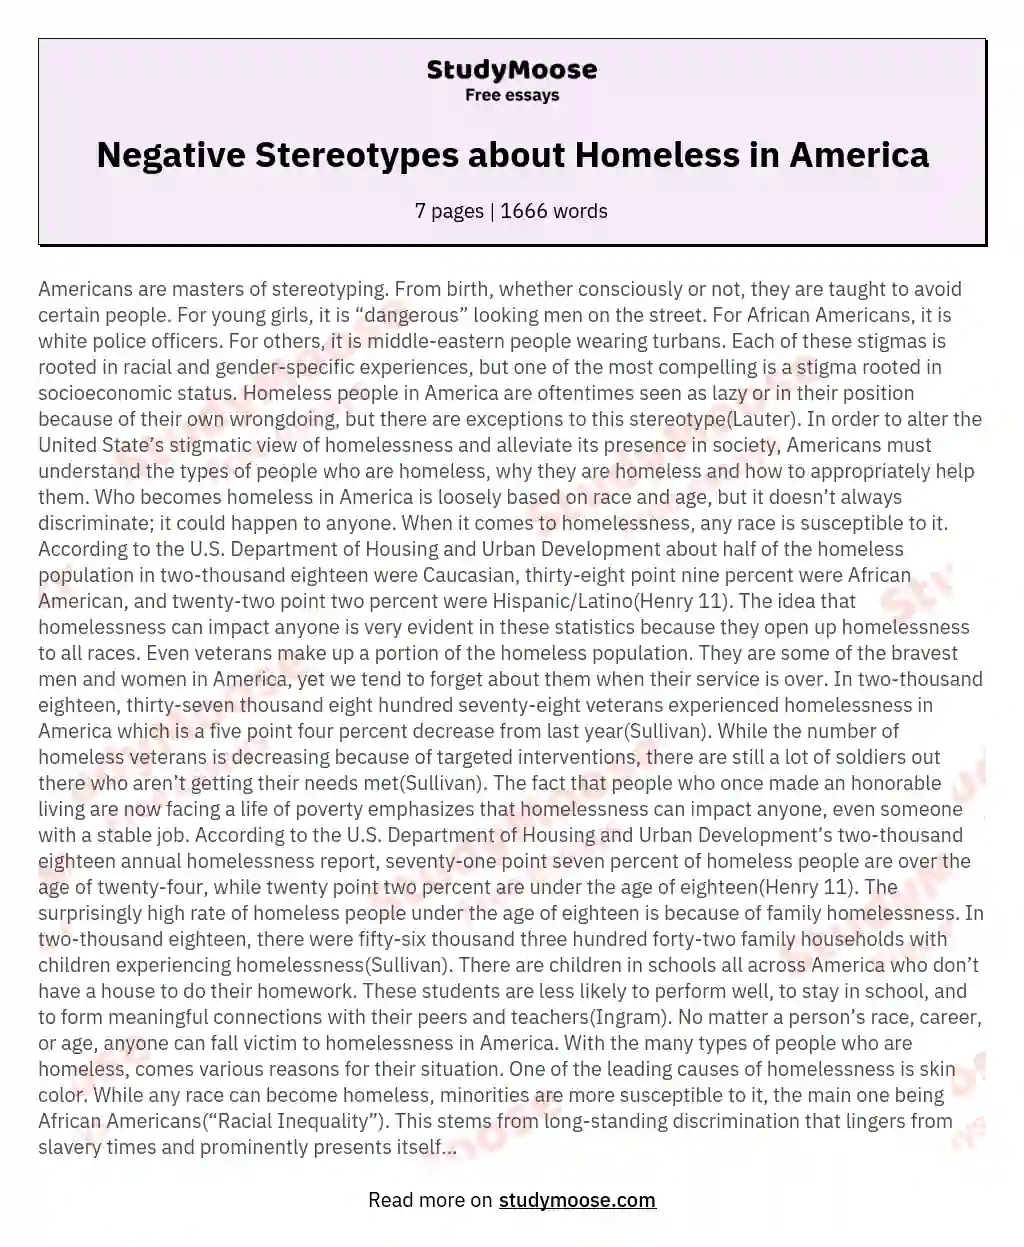 Negative Stereotypes about Homeless in America essay